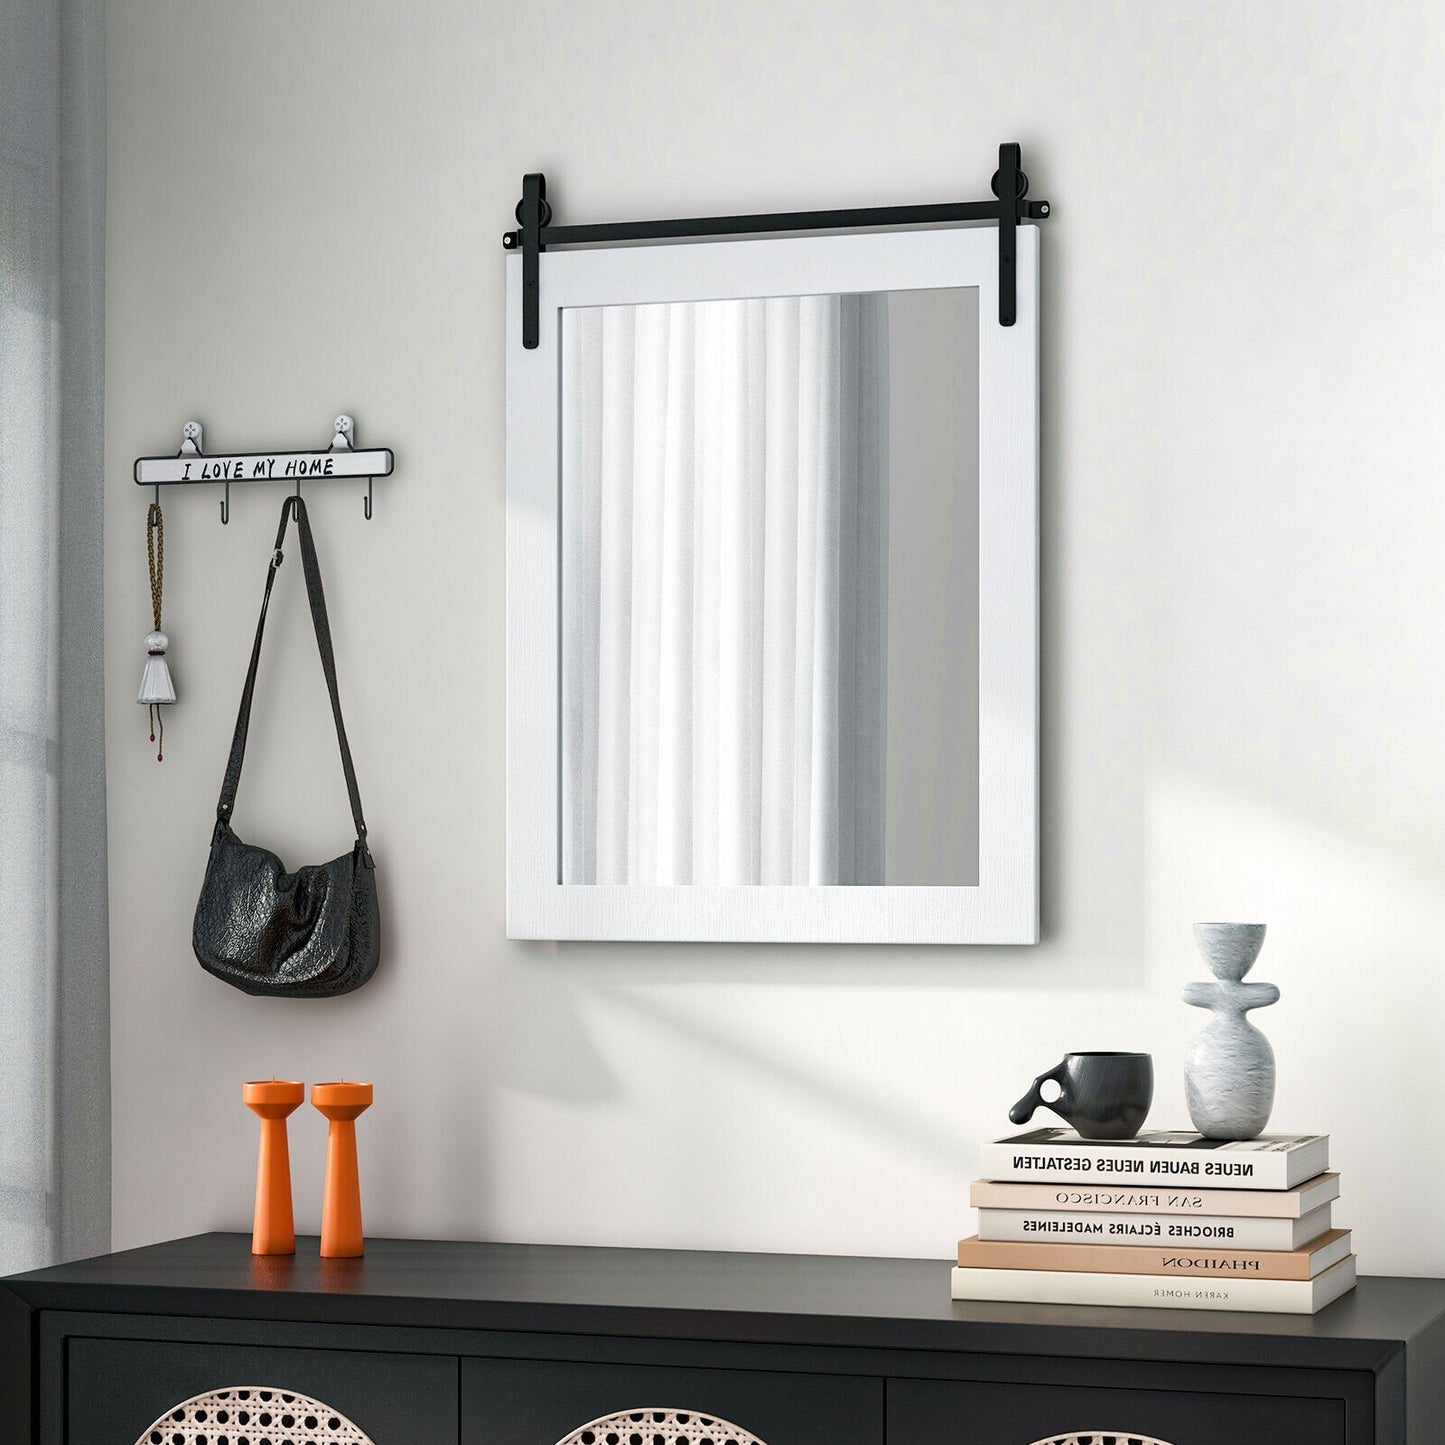 30 x 22 Inch Wall Mount Mirror with Wood Frame, White